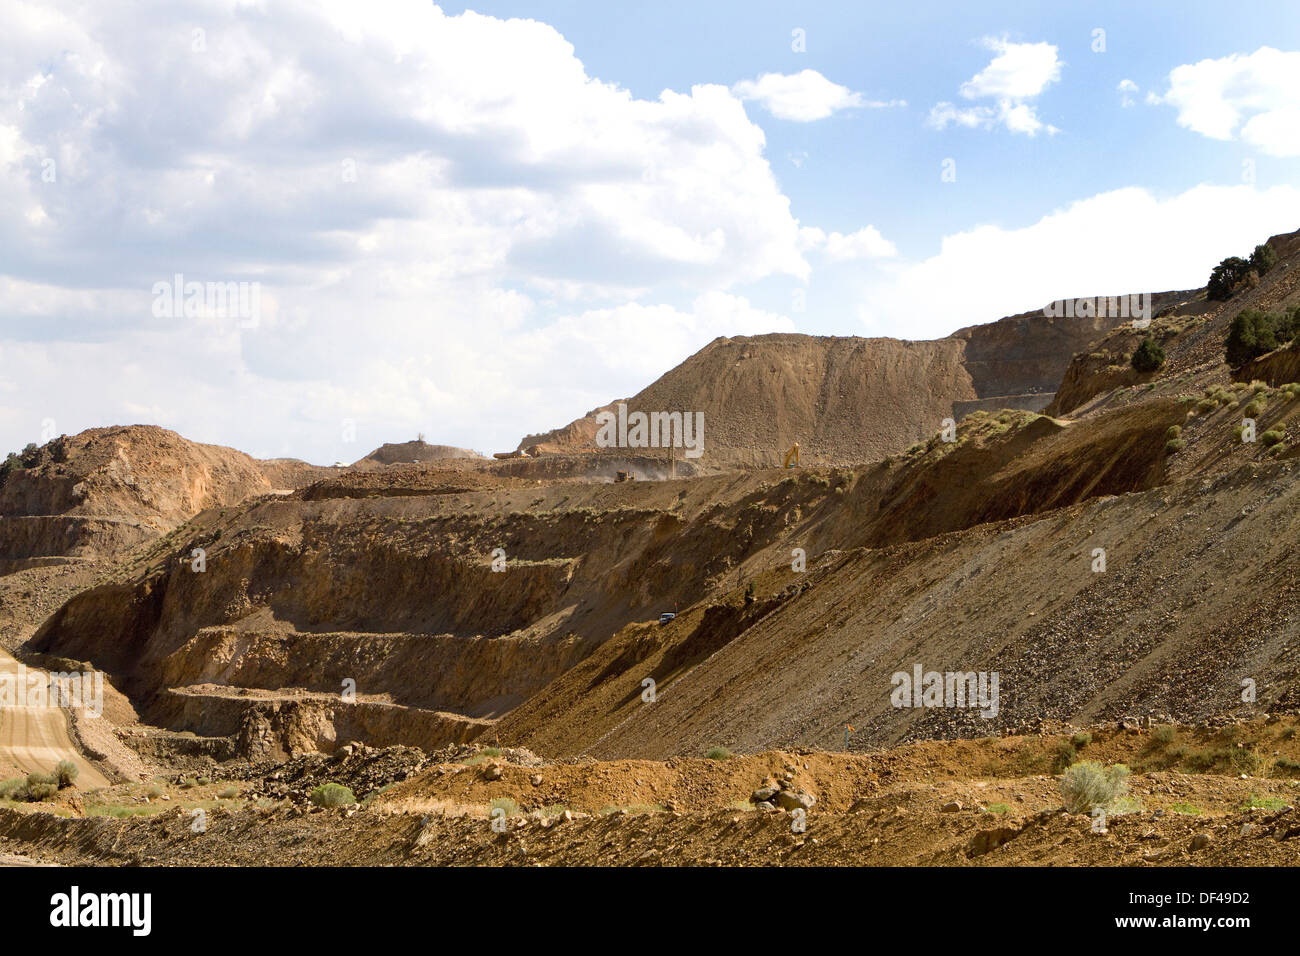 Miners excavate for silver ore at an open strip mine operation in the Nevada mountains. Stock Photo